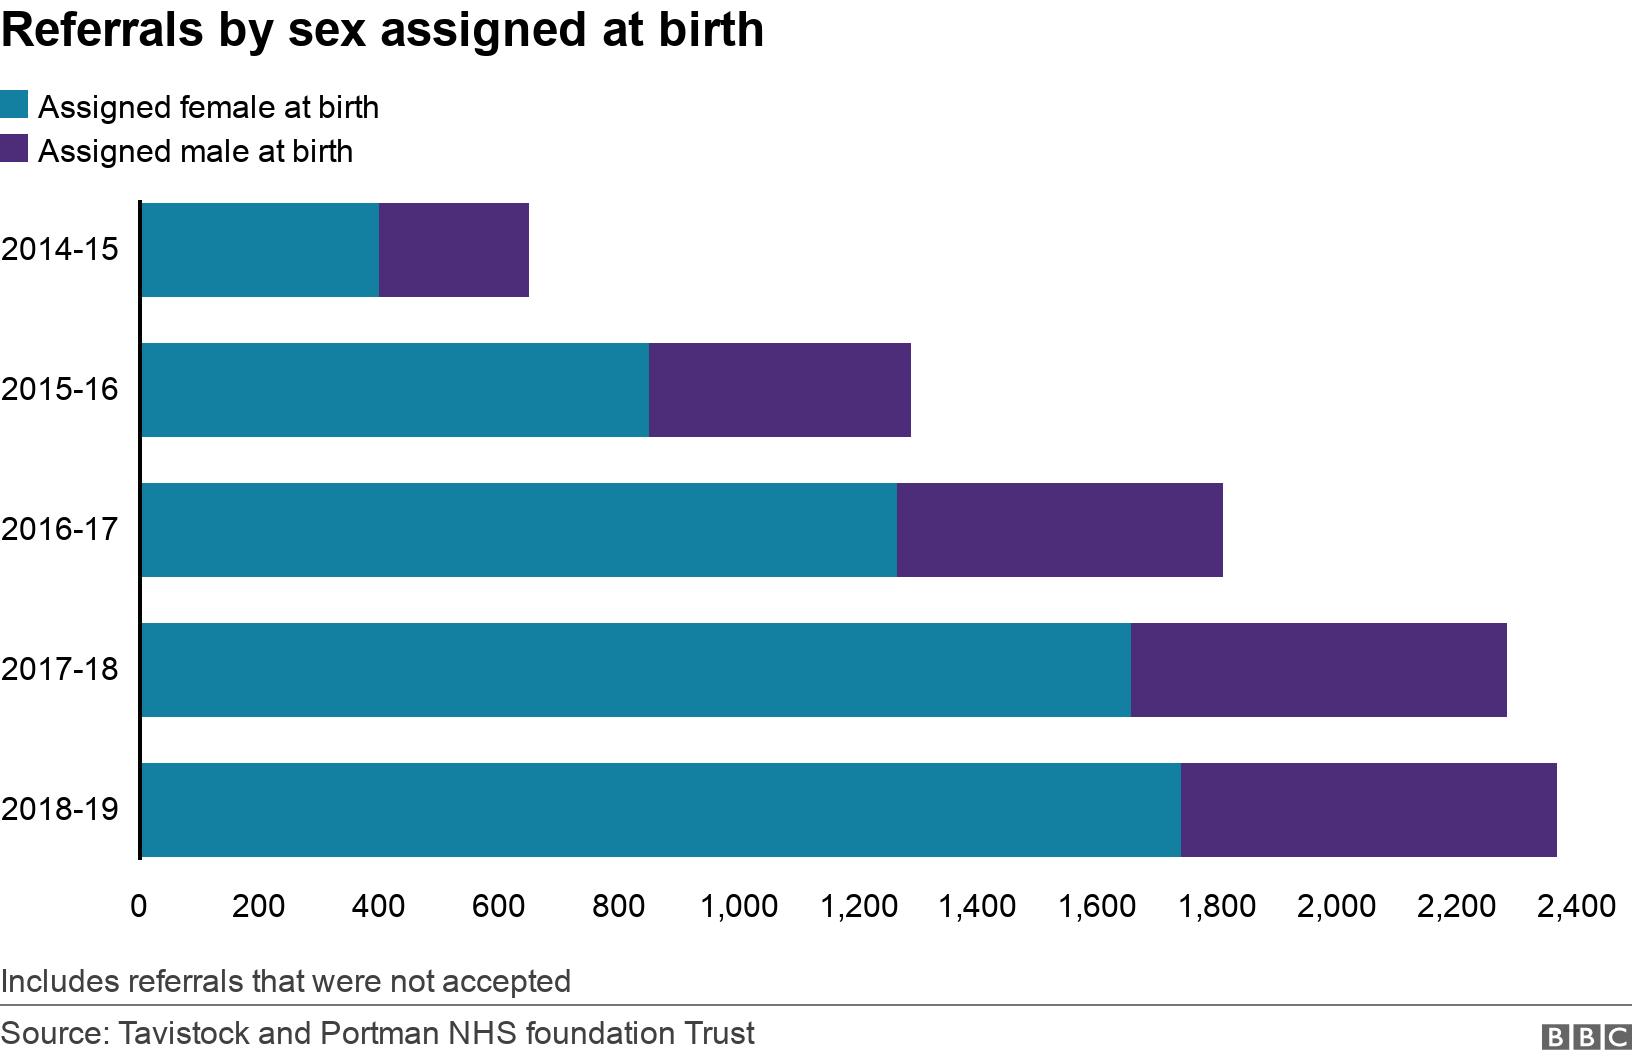 Referrals by sex assigned at birth. . Includes referrals that were not accepted.